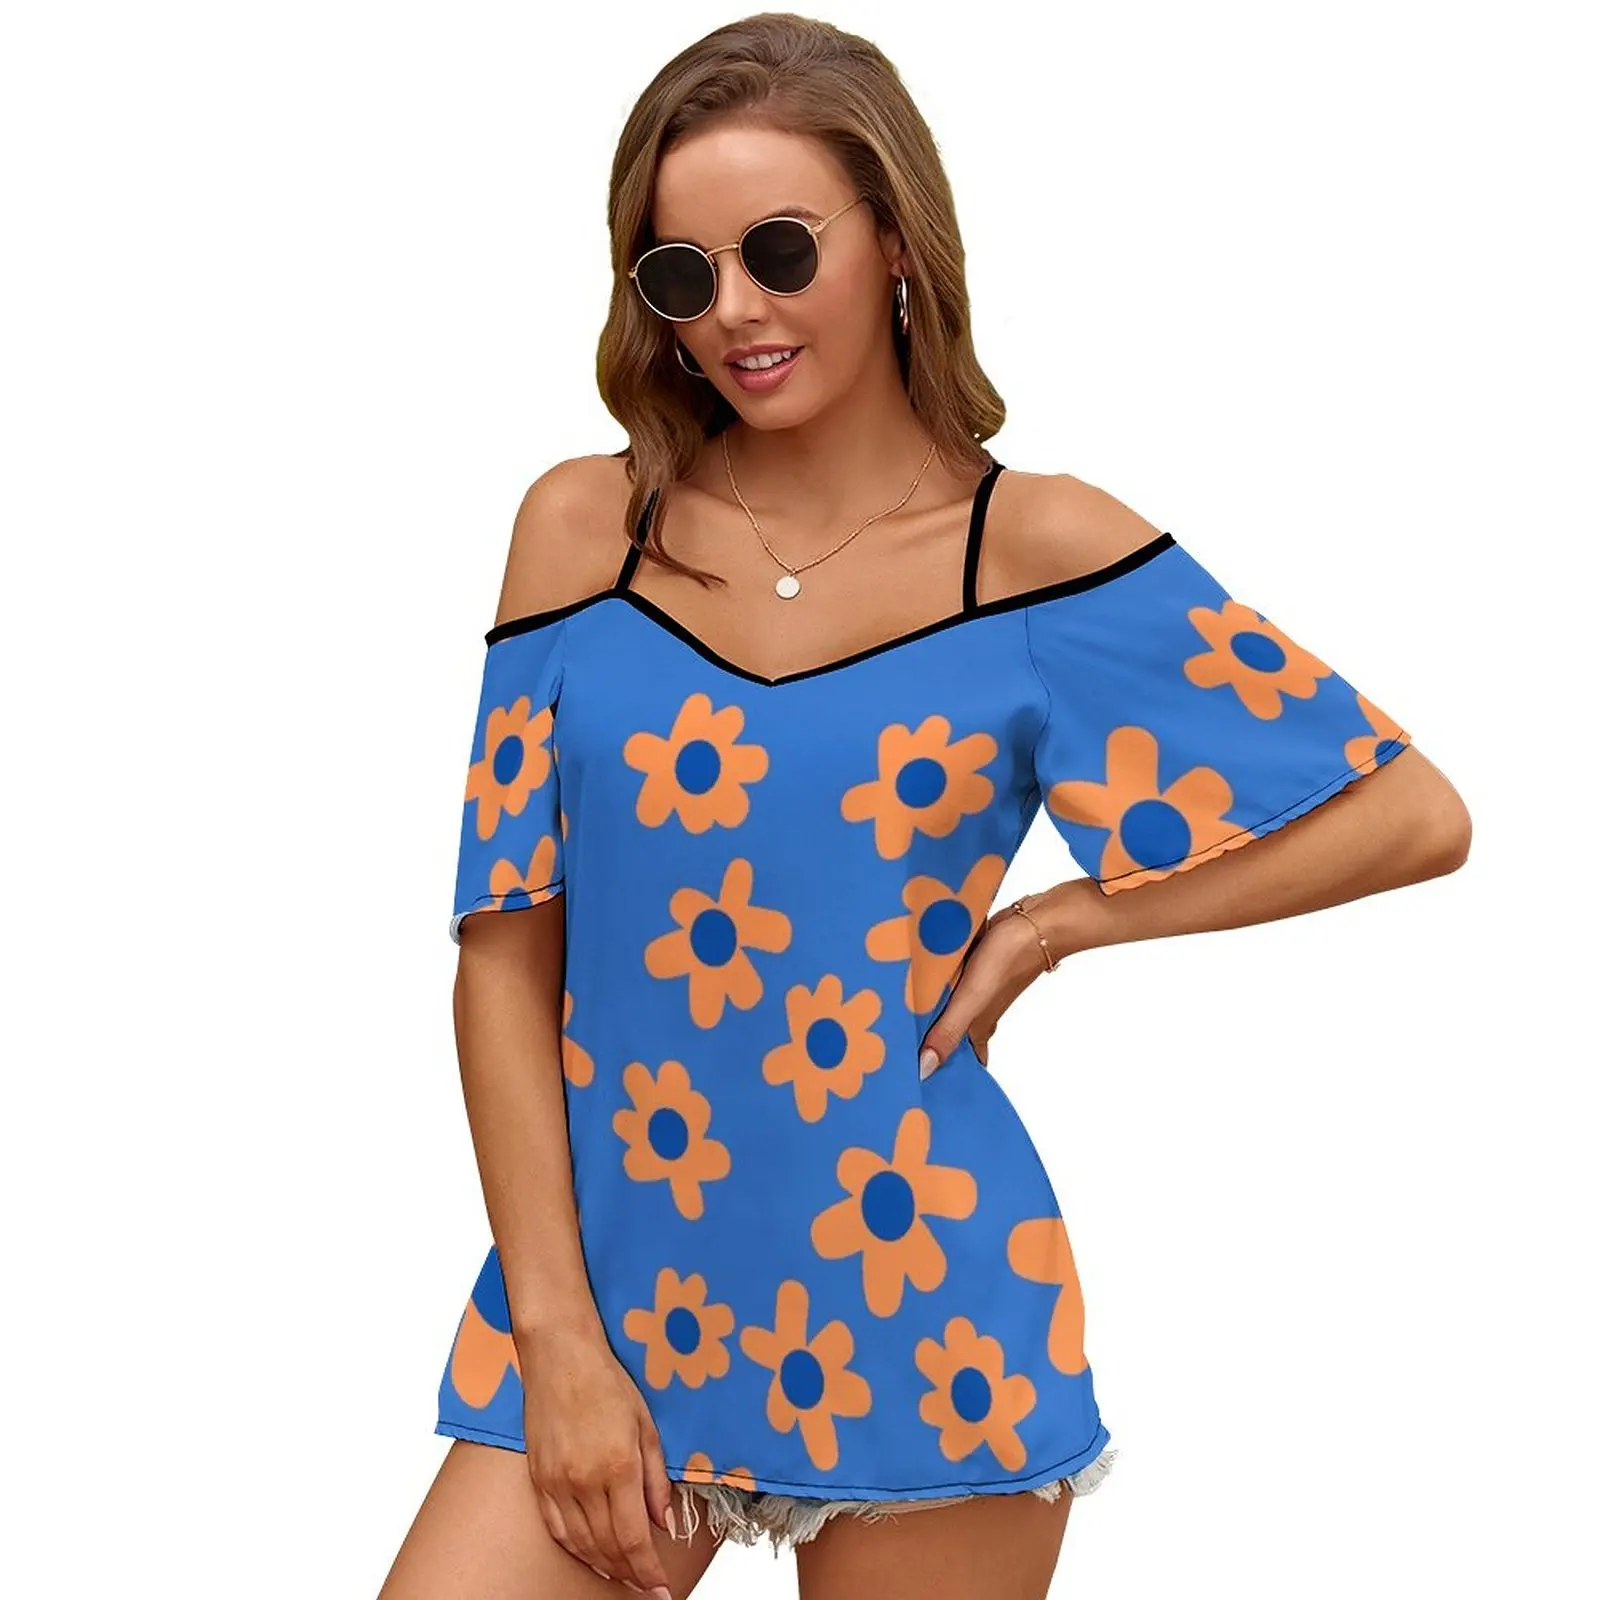 Uf Orange And Blue Floral Pattern Go Women Zipper Sexy Printed Vintage T Shirts Tops Full Print T-Shirt Uf Florida University images - 6